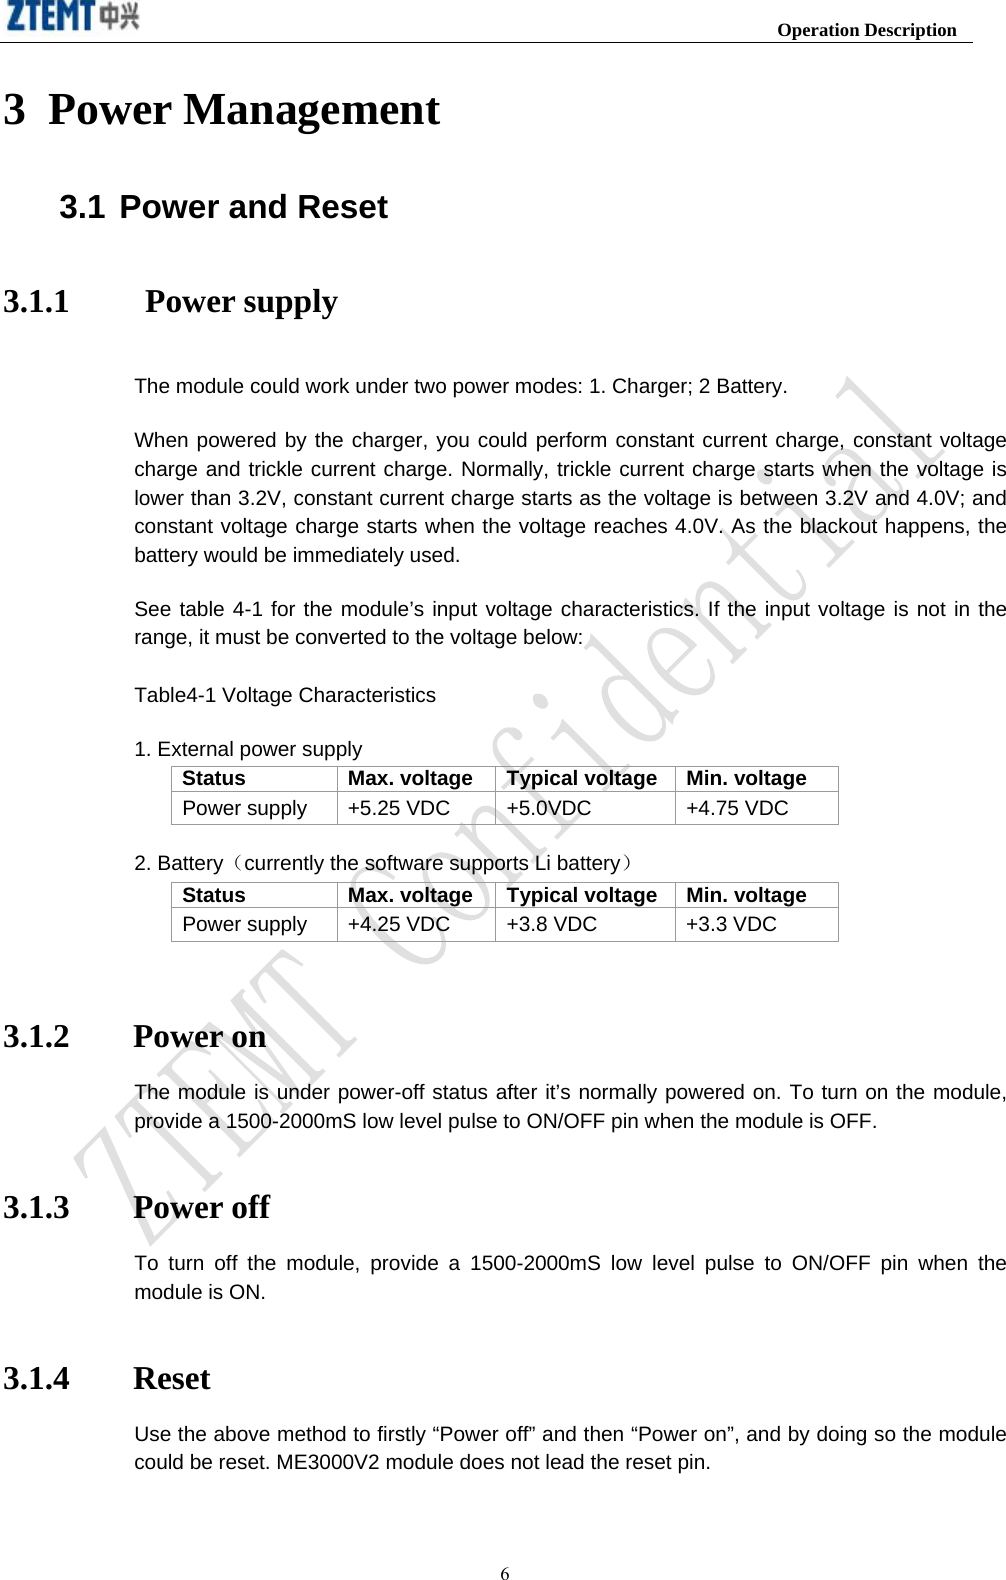                                                                     Operation Description  63 Power Management 3.1 Power and Reset 3.1.1     Power supply The module could work under two power modes: 1. Charger; 2 Battery.   When powered by the charger, you could perform constant current charge, constant voltage charge and trickle current charge. Normally, trickle current charge starts when the voltage is lower than 3.2V, constant current charge starts as the voltage is between 3.2V and 4.0V; and constant voltage charge starts when the voltage reaches 4.0V. As the blackout happens, the battery would be immediately used.   See table 4-1 for the module’s input voltage characteristics. If the input voltage is not in the range, it must be converted to the voltage below: Table4-1 Voltage Characteristics 1. External power supply Status  Max. voltage  Typical voltage Min. voltage   Power supply  +5.25 VDC  +5.0VDC  +4.75 VDC 2. Battery（currently the software supports Li battery） Status  Max. voltage  Typical voltage Min. voltage   Power supply  +4.25 VDC  +3.8 VDC  +3.3 VDC  3.1.2 Power on The module is under power-off status after it’s normally powered on. To turn on the module, provide a 1500-2000mS low level pulse to ON/OFF pin when the module is OFF. 3.1.3 Power off To turn off the module, provide a 1500-2000mS low level pulse to ON/OFF pin when the module is ON. 3.1.4 Reset Use the above method to firstly “Power off” and then “Power on”, and by doing so the module could be reset. ME3000V2 module does not lead the reset pin. 